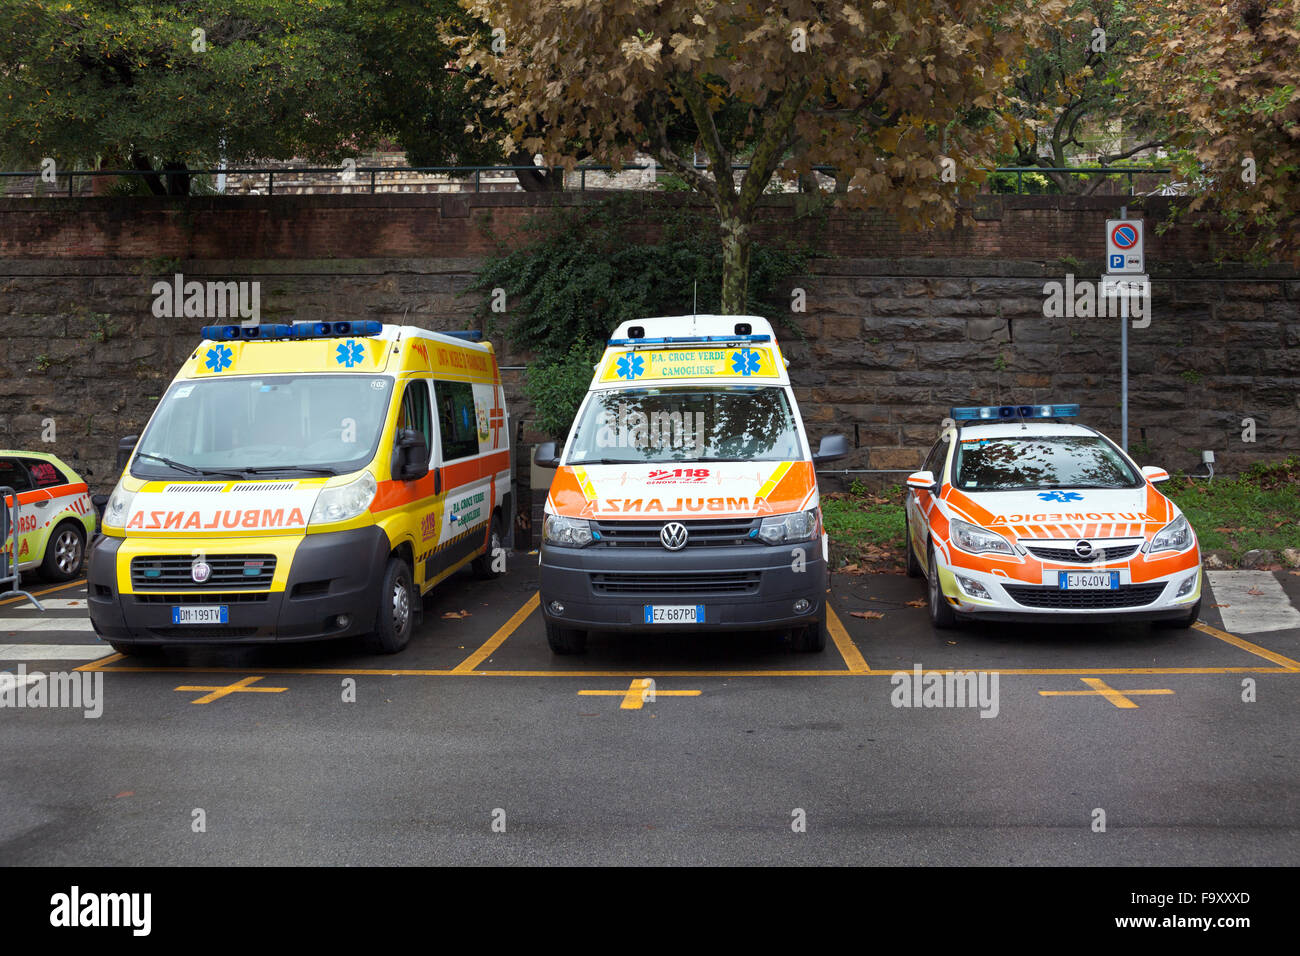 Italian ambulance cars parked in a parking lot Stock Photo